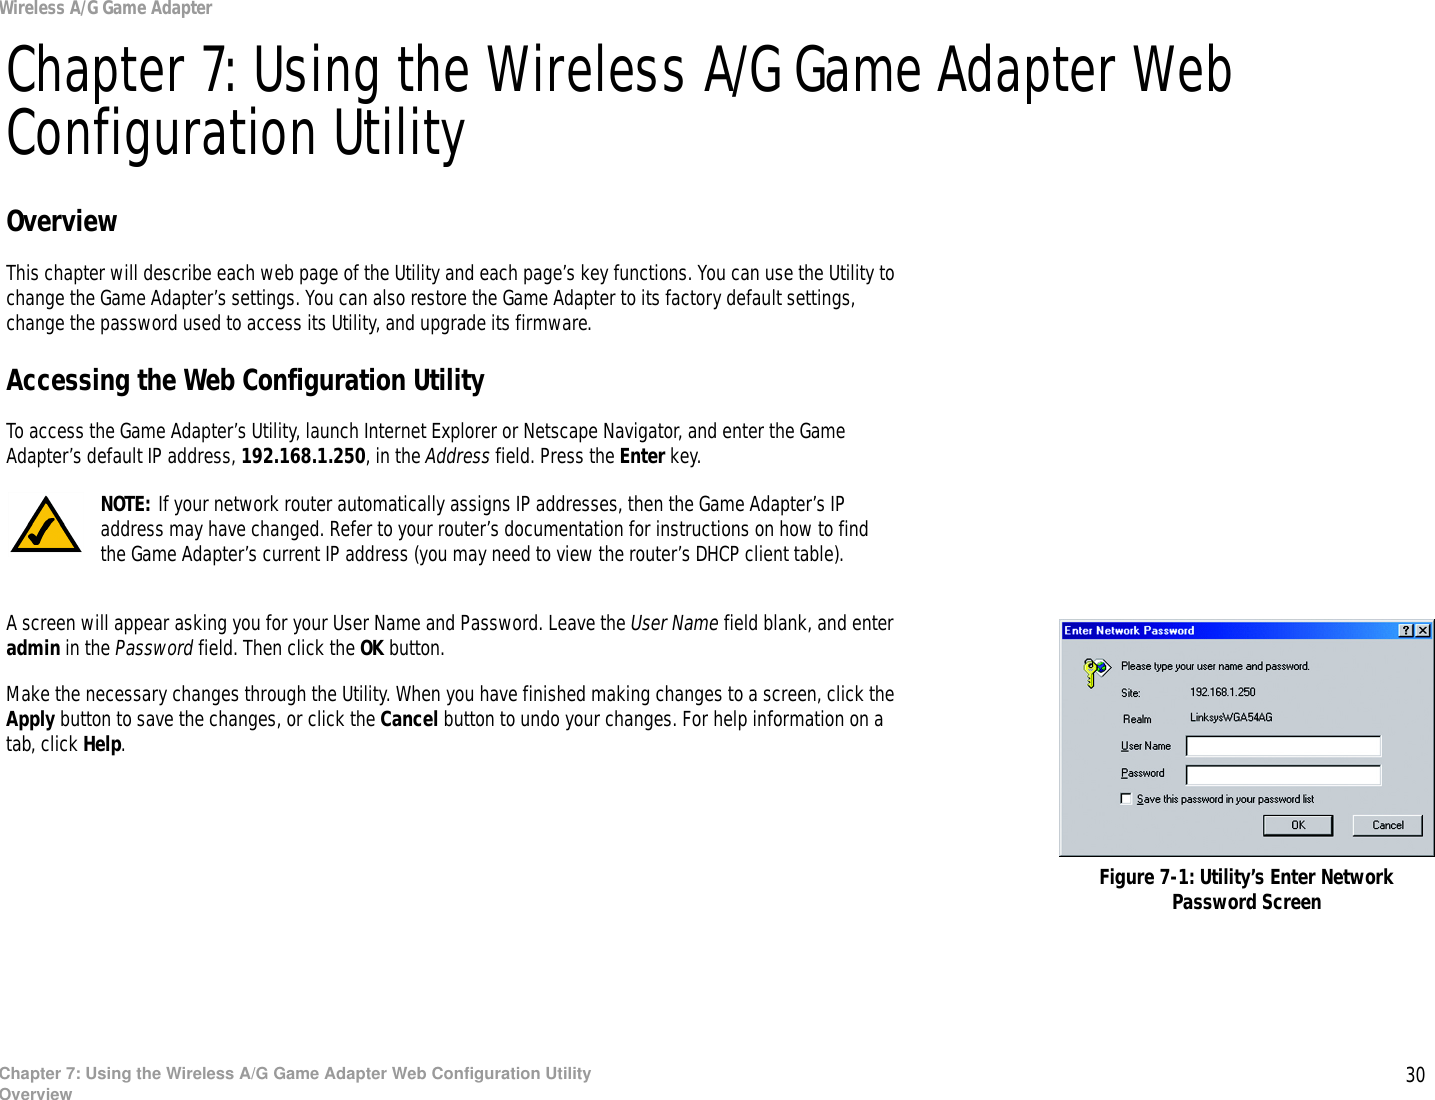 30Chapter 7: Using the Wireless A/G Game Adapter Web Configuration UtilityOverviewWireless A/G Game AdapterChapter 7: Using the Wireless A/G Game Adapter Web Configuration UtilityOverviewThis chapter will describe each web page of the Utility and each page’s key functions. You can use the Utility to change the Game Adapter’s settings. You can also restore the Game Adapter to its factory default settings, change the password used to access its Utility, and upgrade its firmware.Accessing the Web Configuration UtilityTo access the Game Adapter’s Utility, launch Internet Explorer or Netscape Navigator, and enter the Game Adapter’s default IP address, 192.168.1.250, in the Address field. Press the Enter key.A screen will appear asking you for your User Name and Password. Leave the User Name field blank, and enter admin in the Password field. Then click the OK button.Make the necessary changes through the Utility. When you have finished making changes to a screen, click the Apply button to save the changes, or click the Cancel button to undo your changes. For help information on a tab, click Help.Figure 7-1: Utility’s Enter Network Password ScreenNOTE: If your network router automatically assigns IP addresses, then the Game Adapter’s IP address may have changed. Refer to your router’s documentation for instructions on how to find the Game Adapter’s current IP address (you may need to view the router’s DHCP client table).